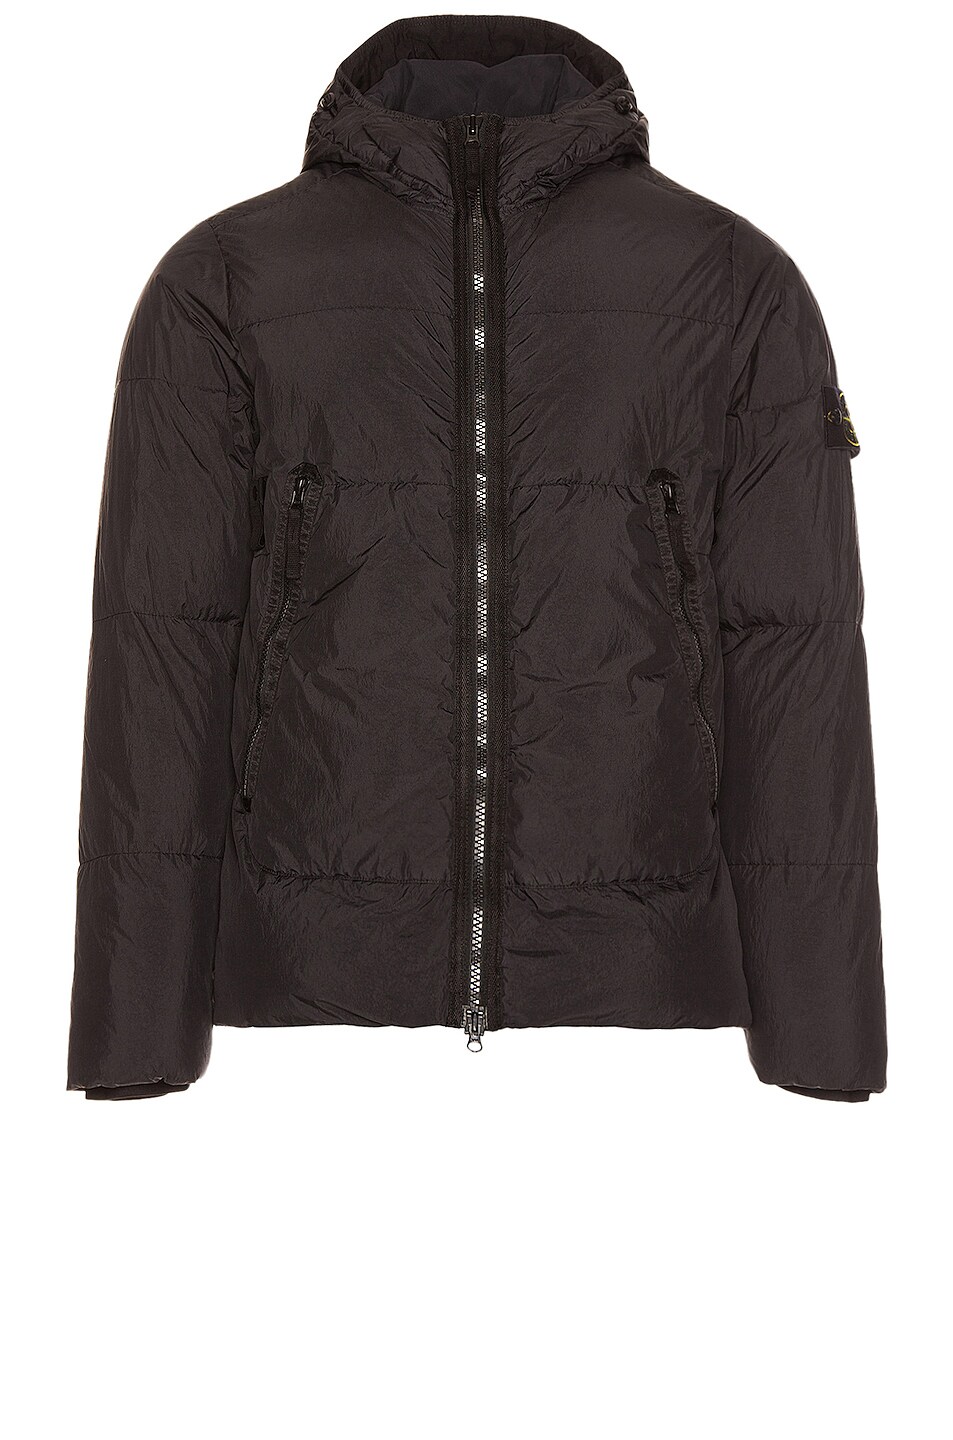 Image 1 of Stone Island Real Down Jacket in Black